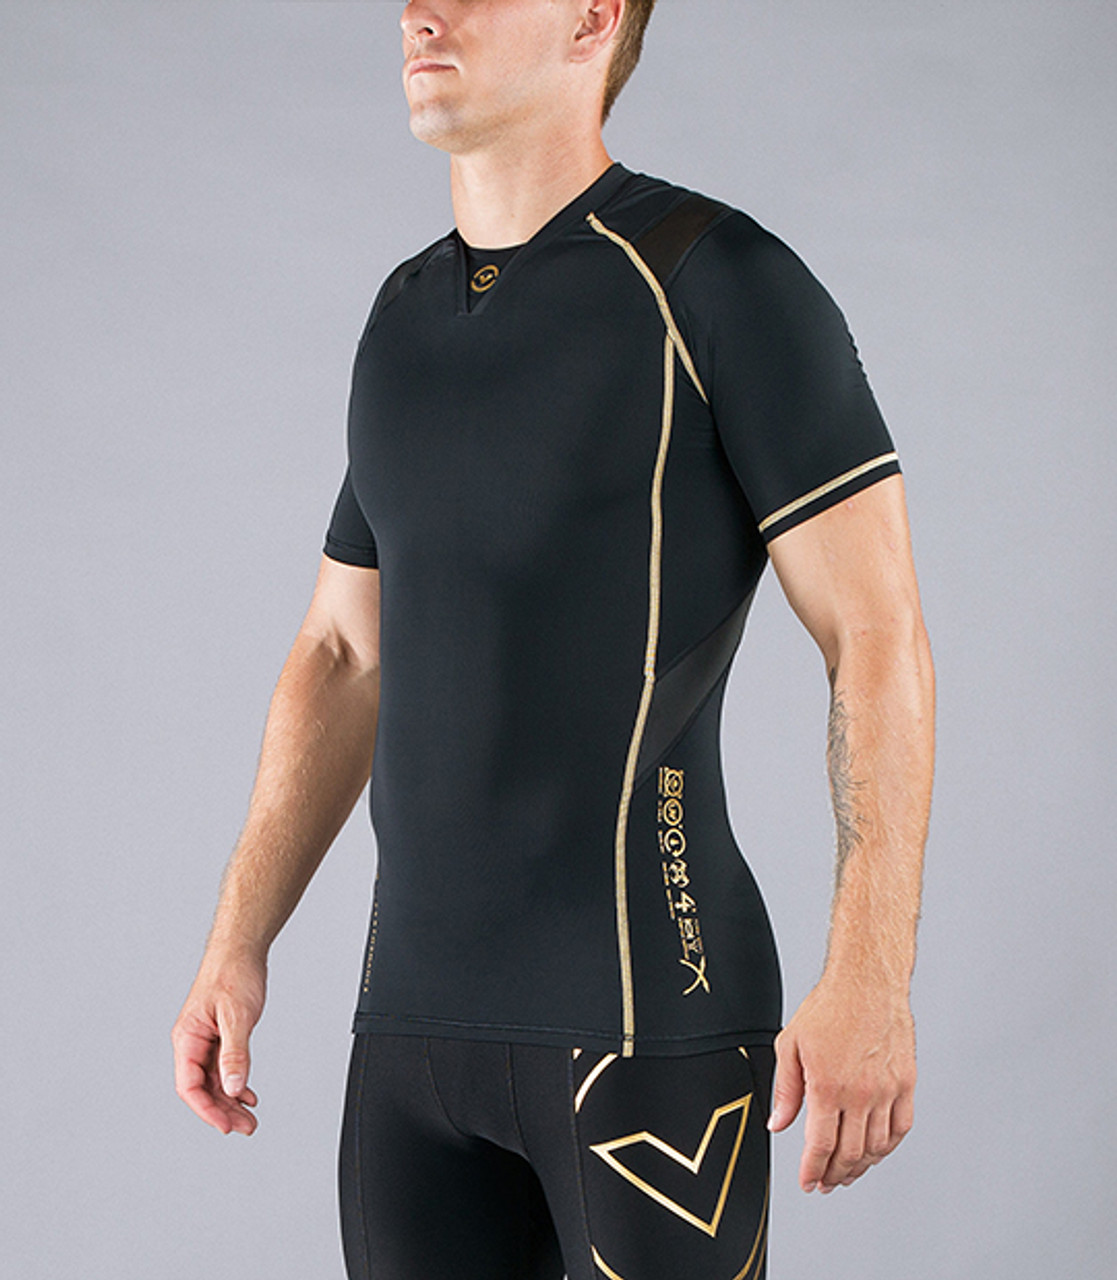 Short Sleeve Compression Top - ZEROPOINT